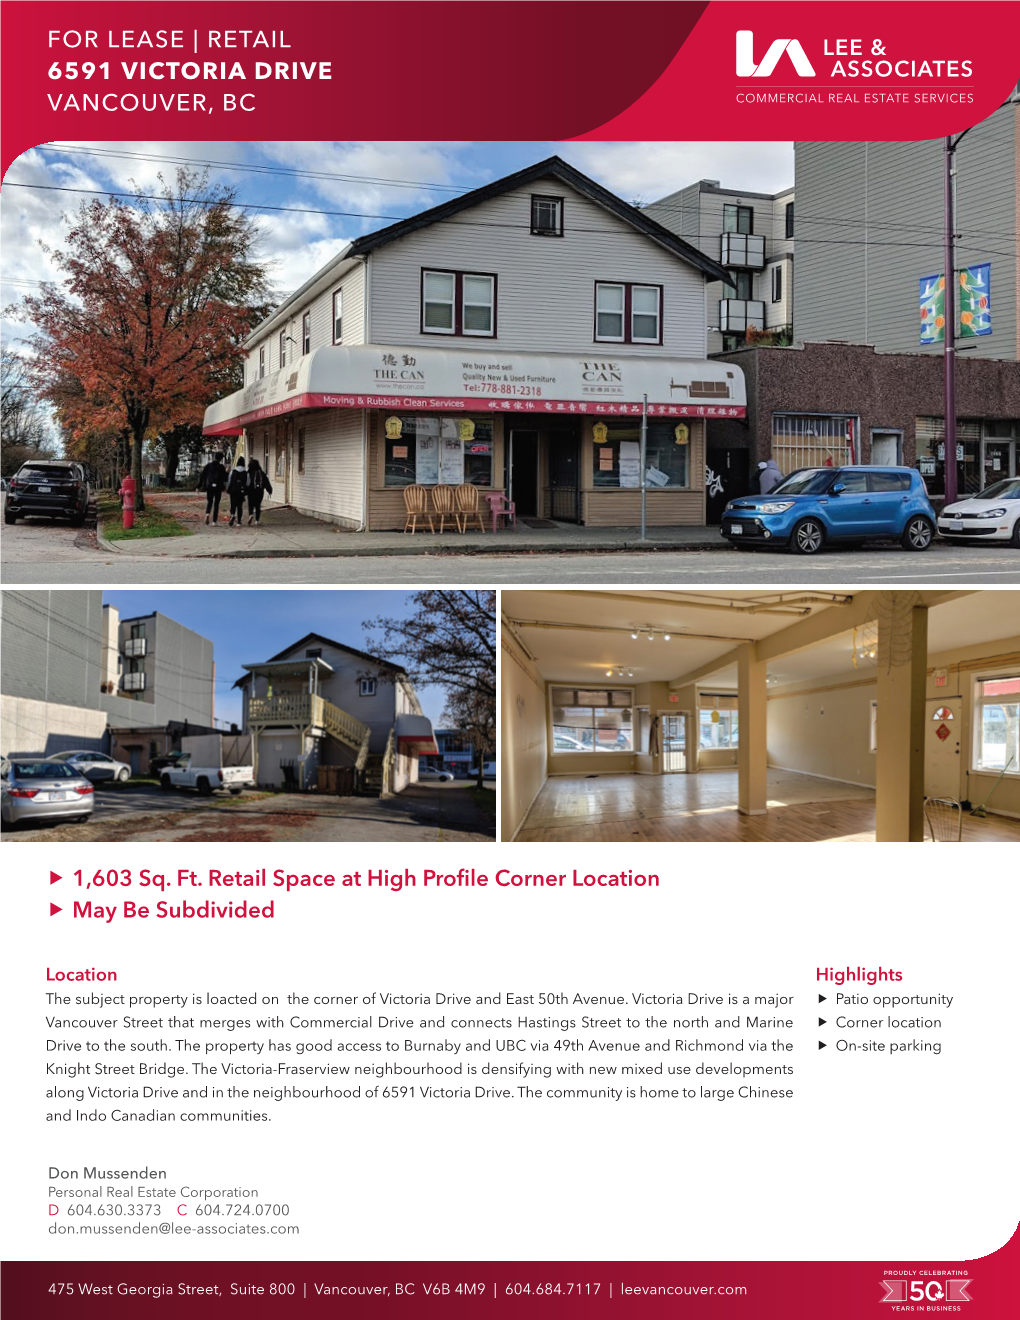 For Lease | Retail 6591 Victoria Drive Vancouver, Bc